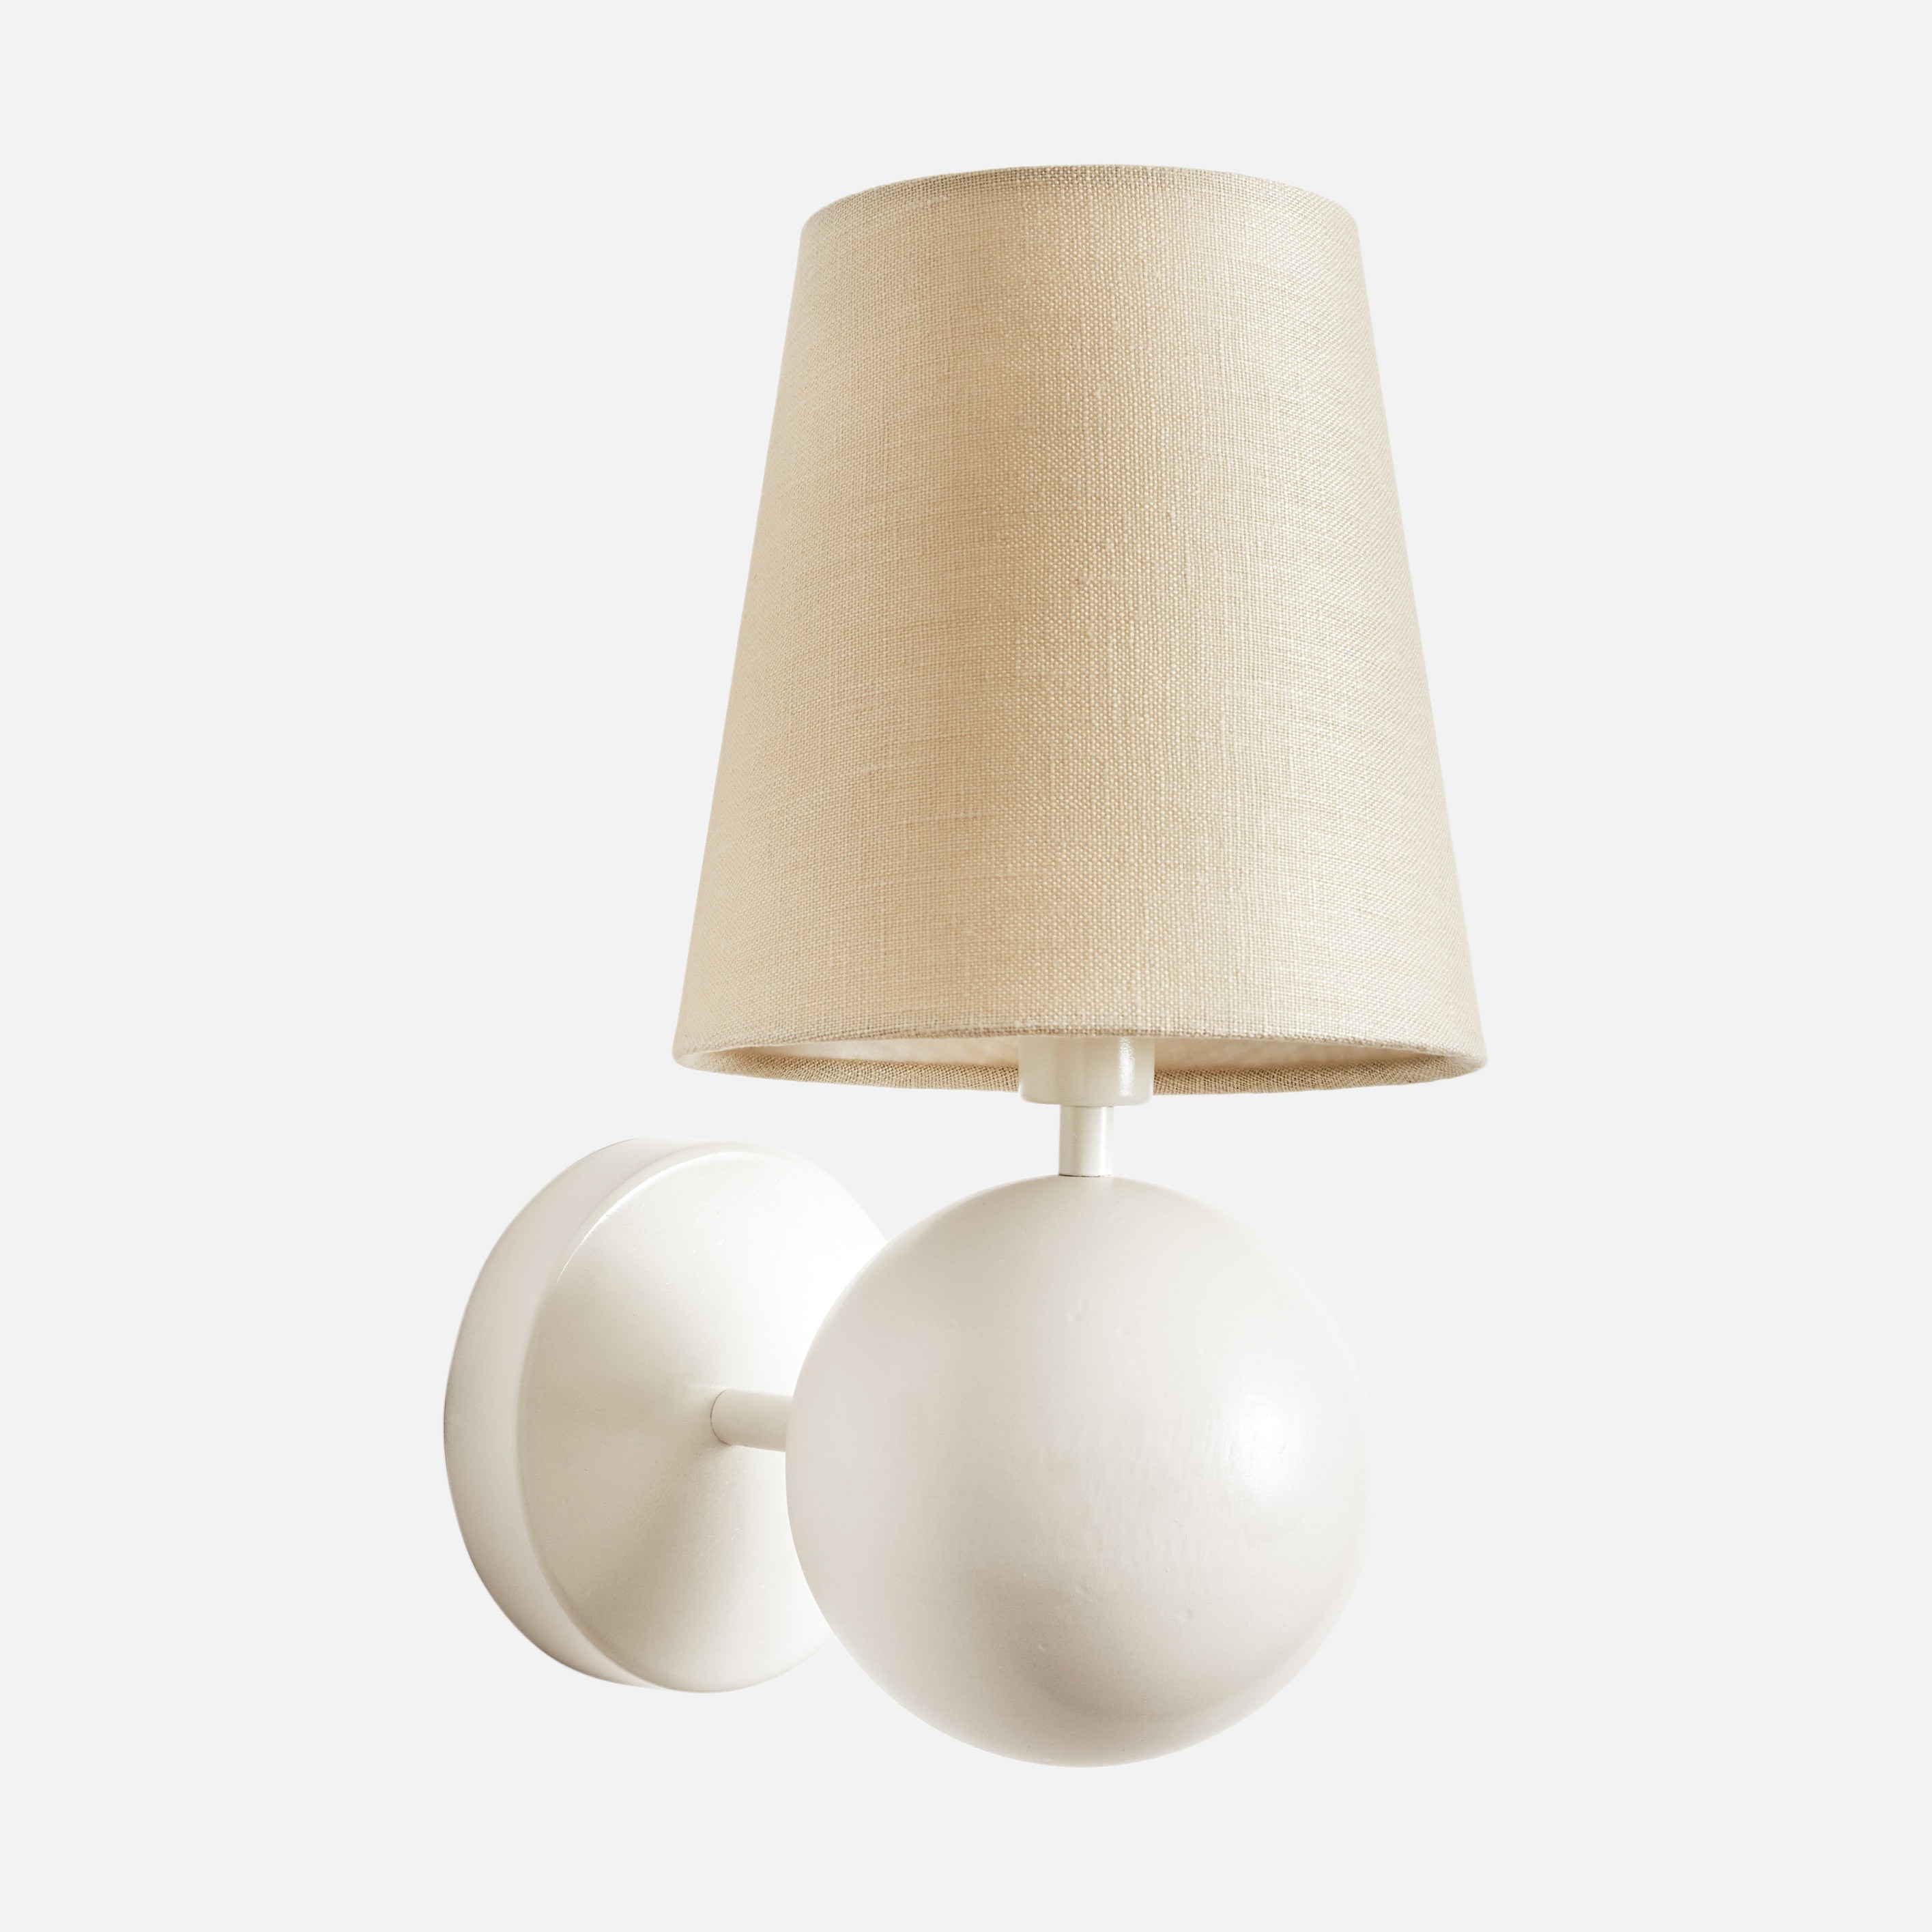 a white wall light with a beige shade on it